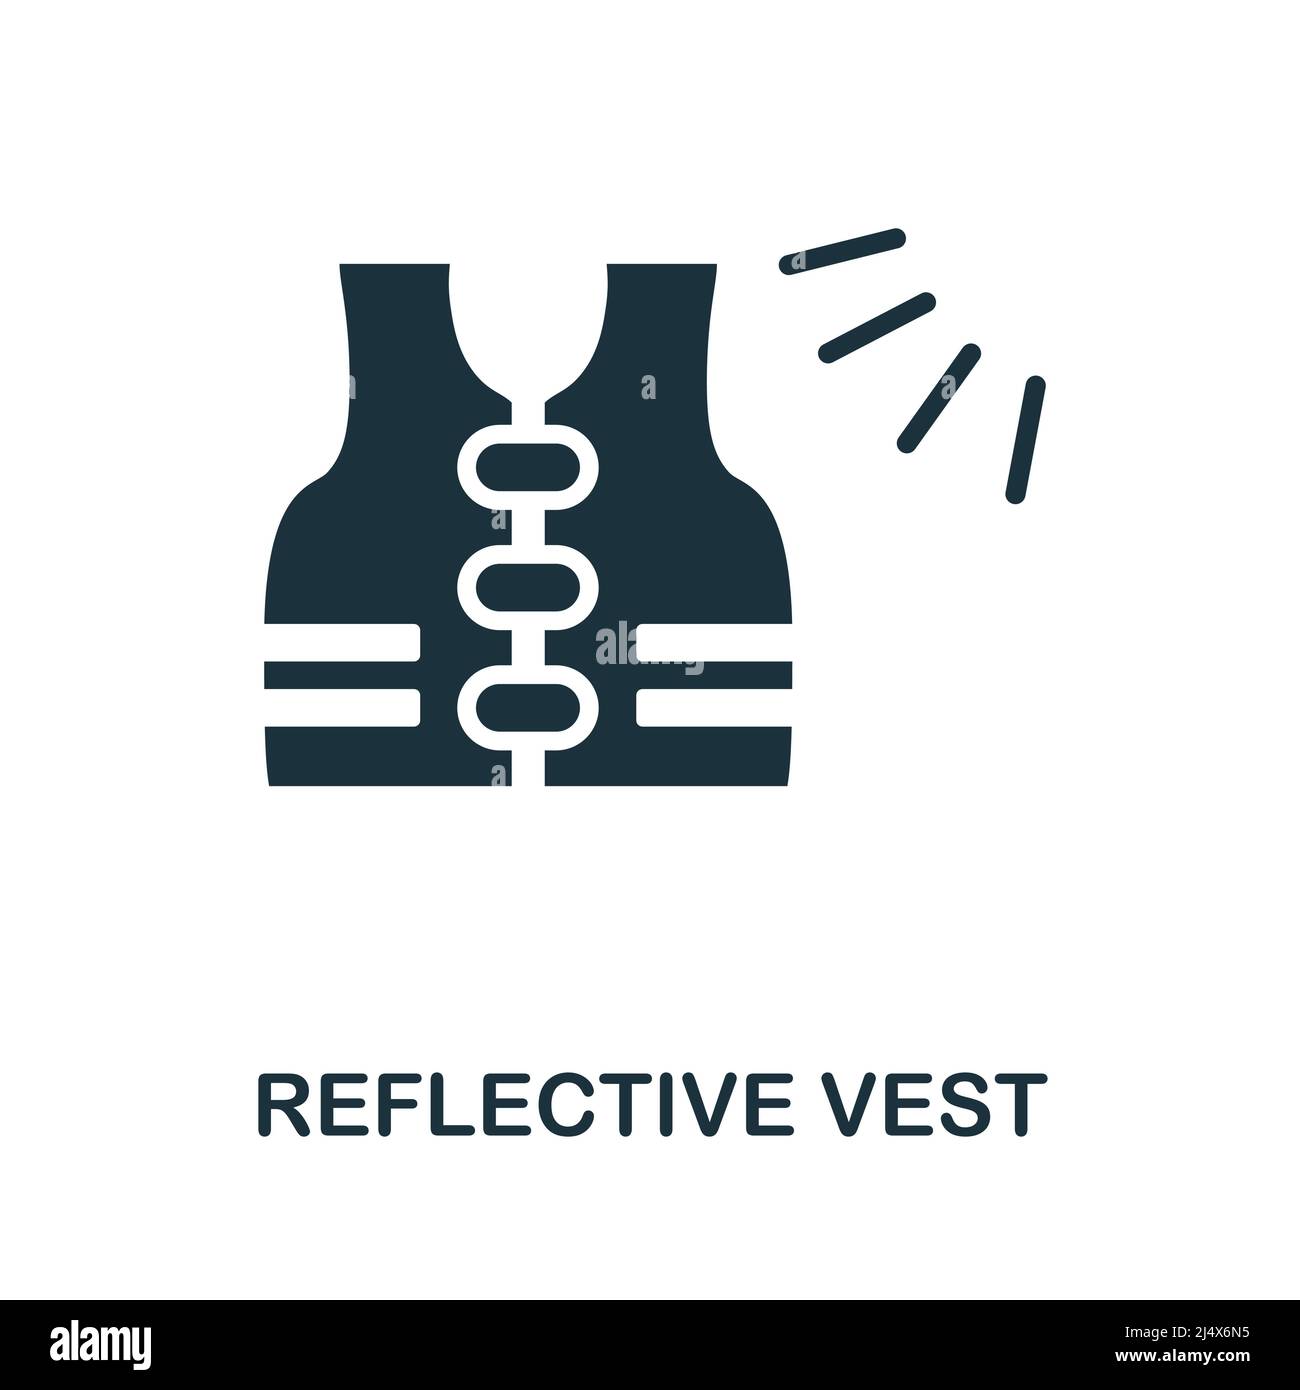 Reflective Vest icon. Monochrome simple Reflective Vest icon for templates, web design and infographics Stock Vector